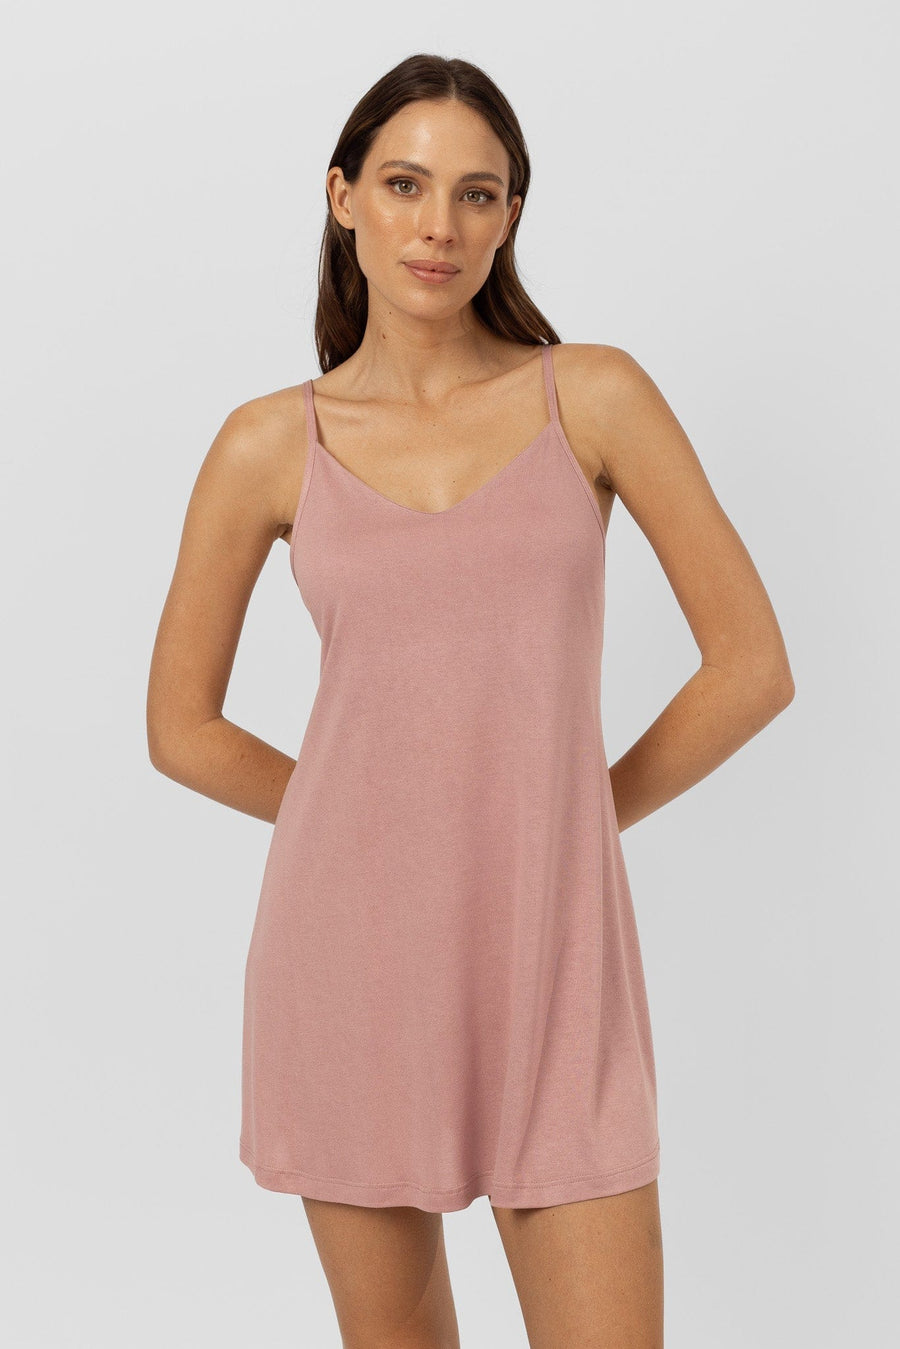 Willow Dress | Blush Pink Nightgowns Australia Online | Reverie the Label  DRESSES Willow Dress